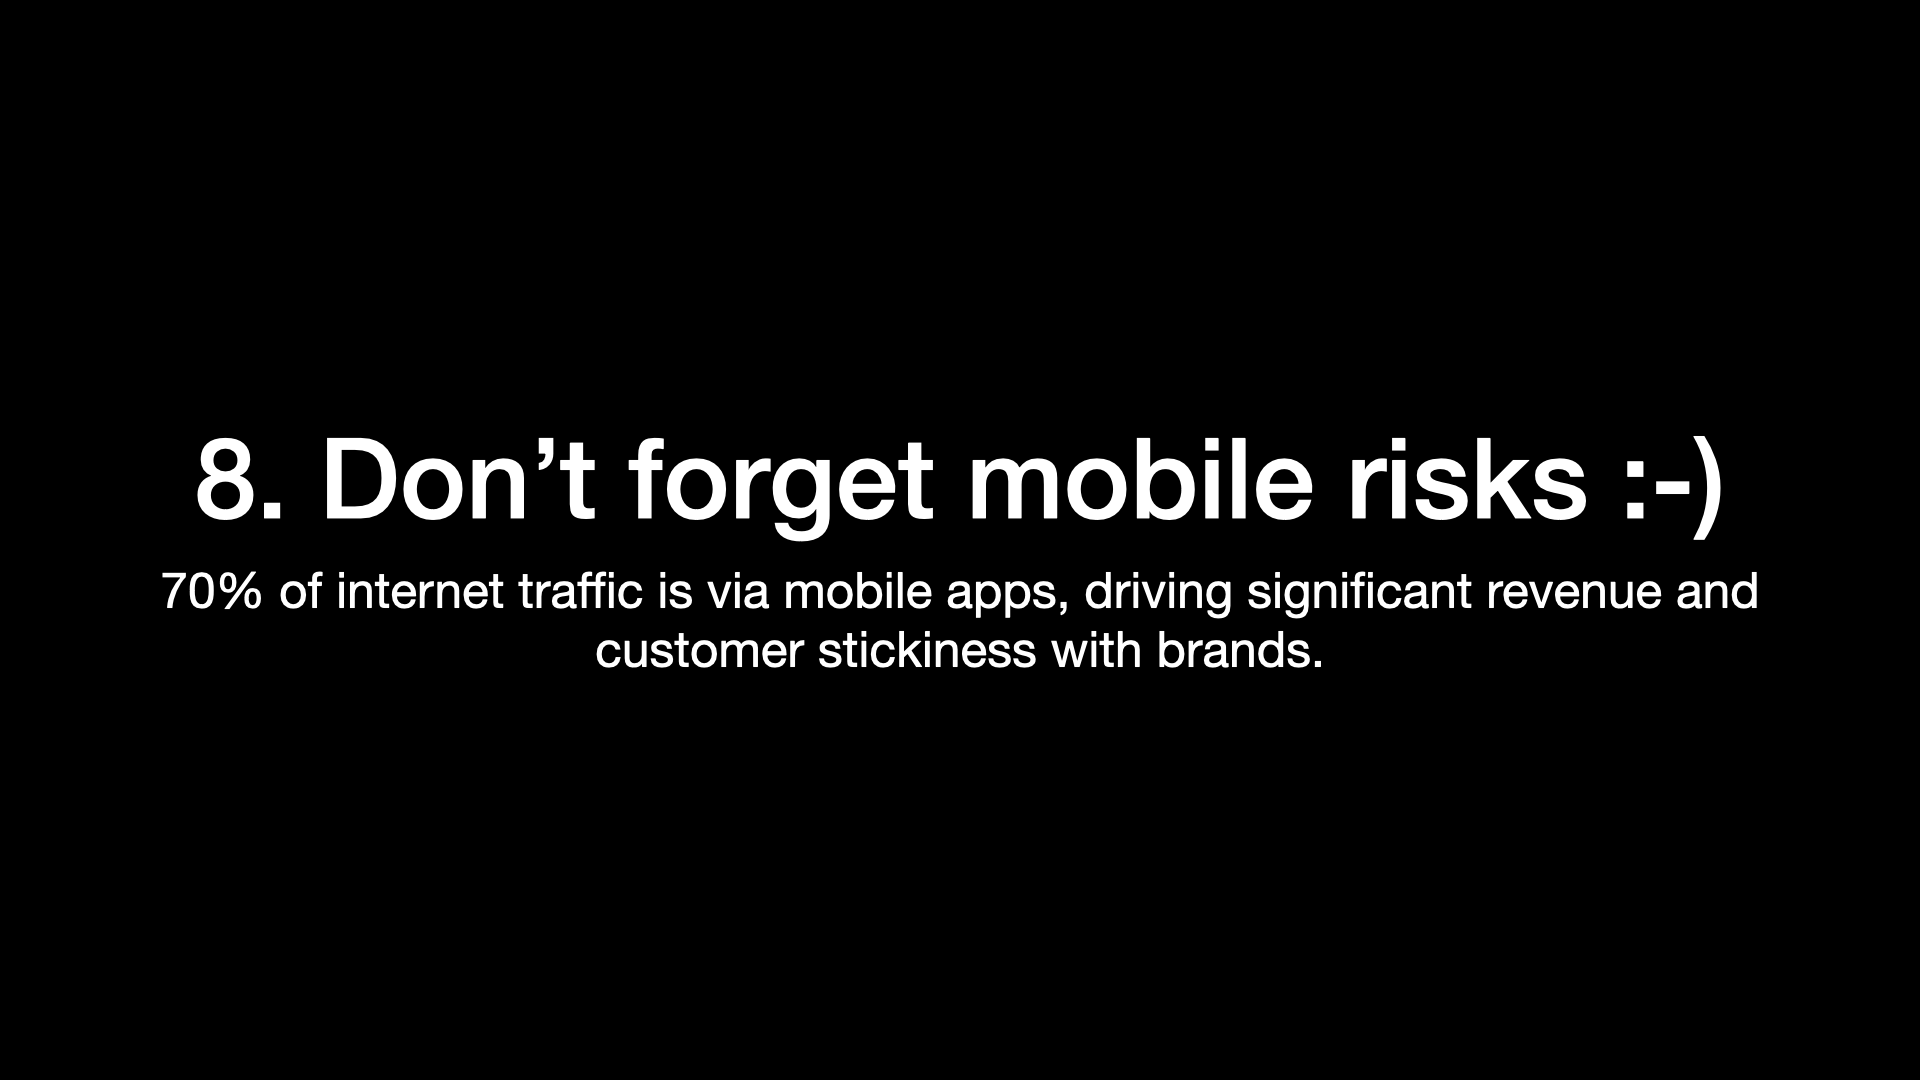 8. Don’t forget mobile risks :-) 70% of internet traffic is via mobile apps, driving significant revenue and customer stickiness with brands. 